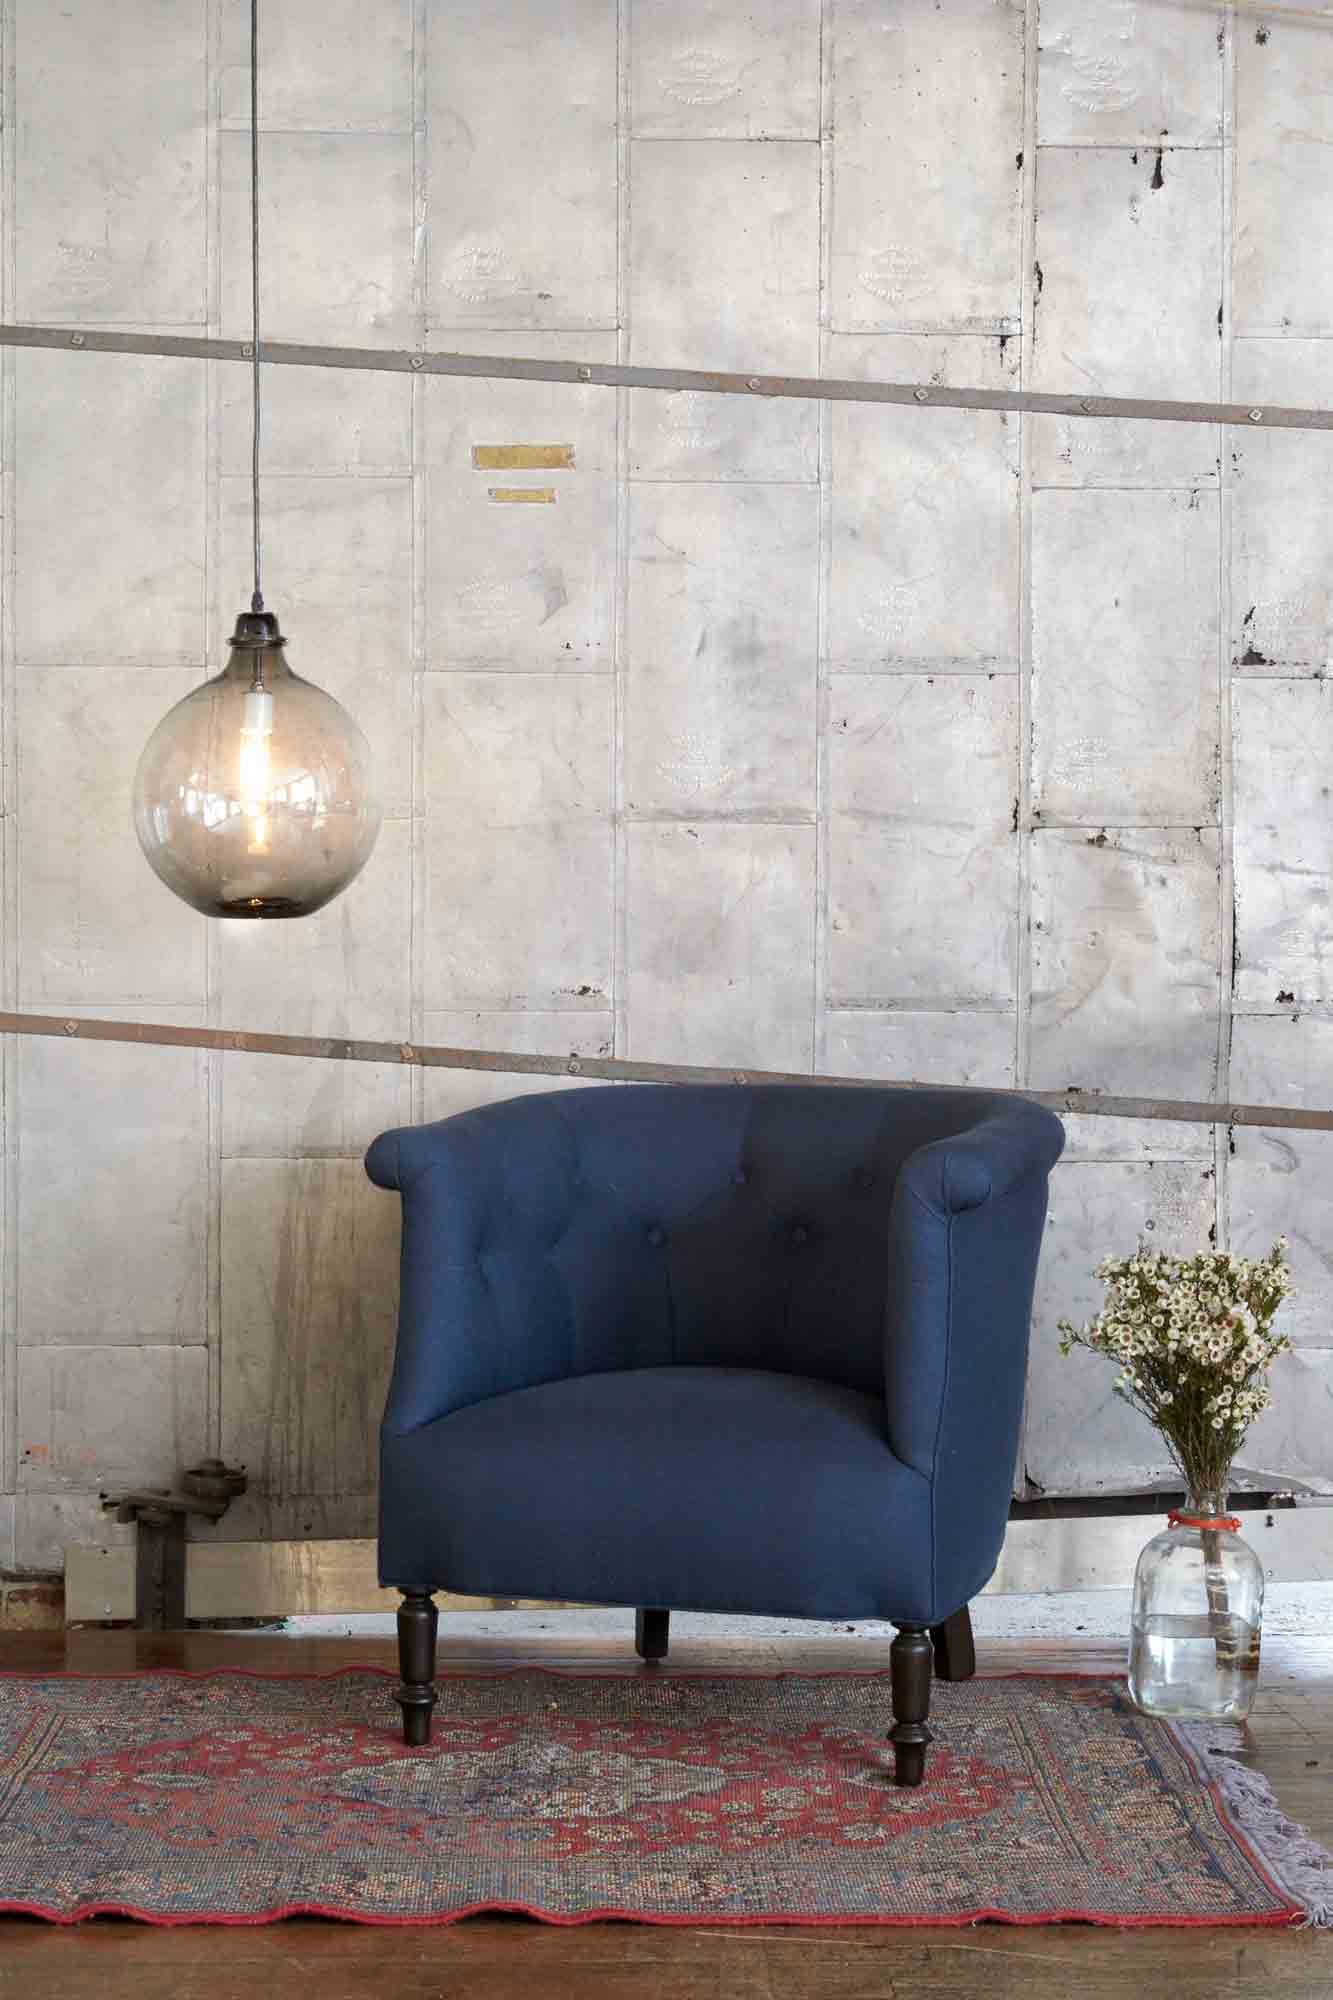  Upholstered chair in blue fabric with extra large jug lamp hanging next to it in smoke finish.  